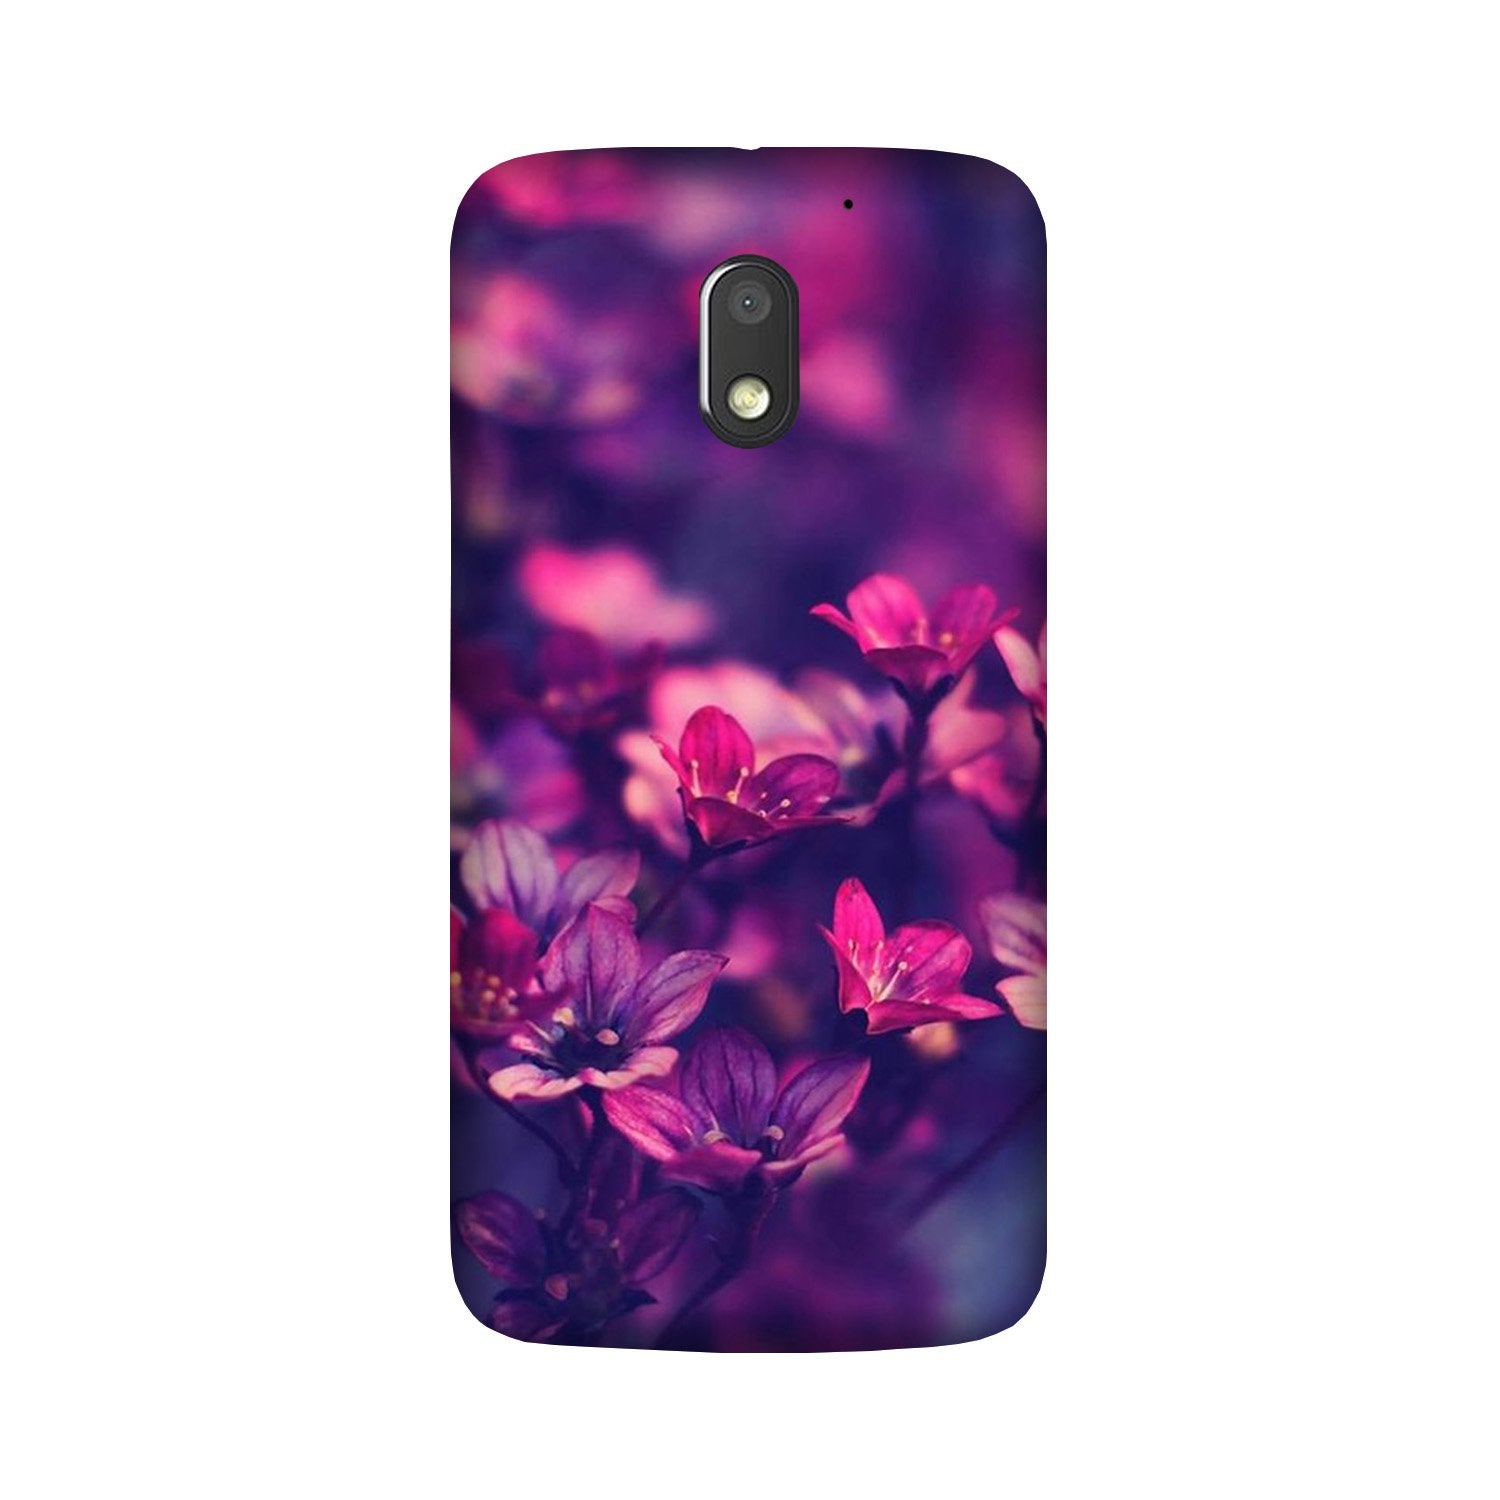 flowers Case for Moto G4 Play